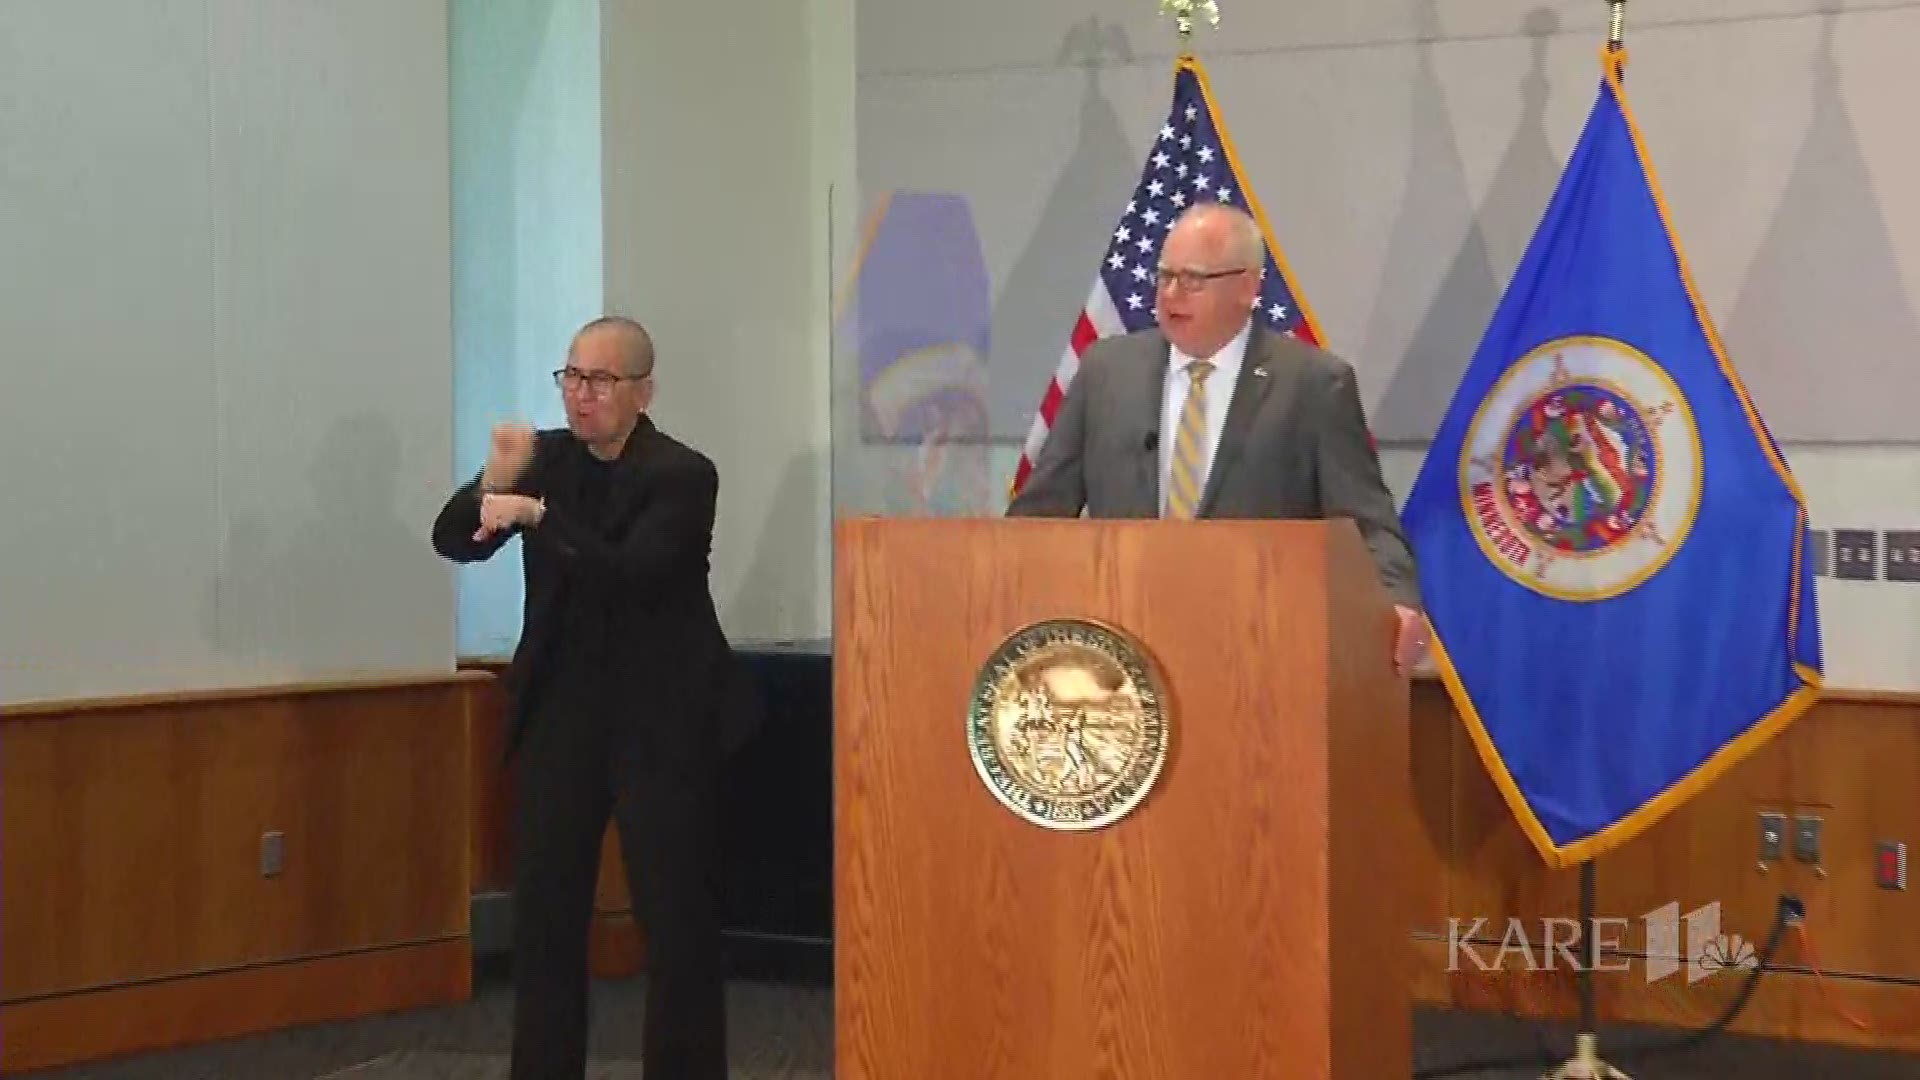 Gov. Tim Walz and bipartisan Minnesota House and Senate leaders announced an agreement on the state budget on Monday morning, ahead of the midnight deadline.